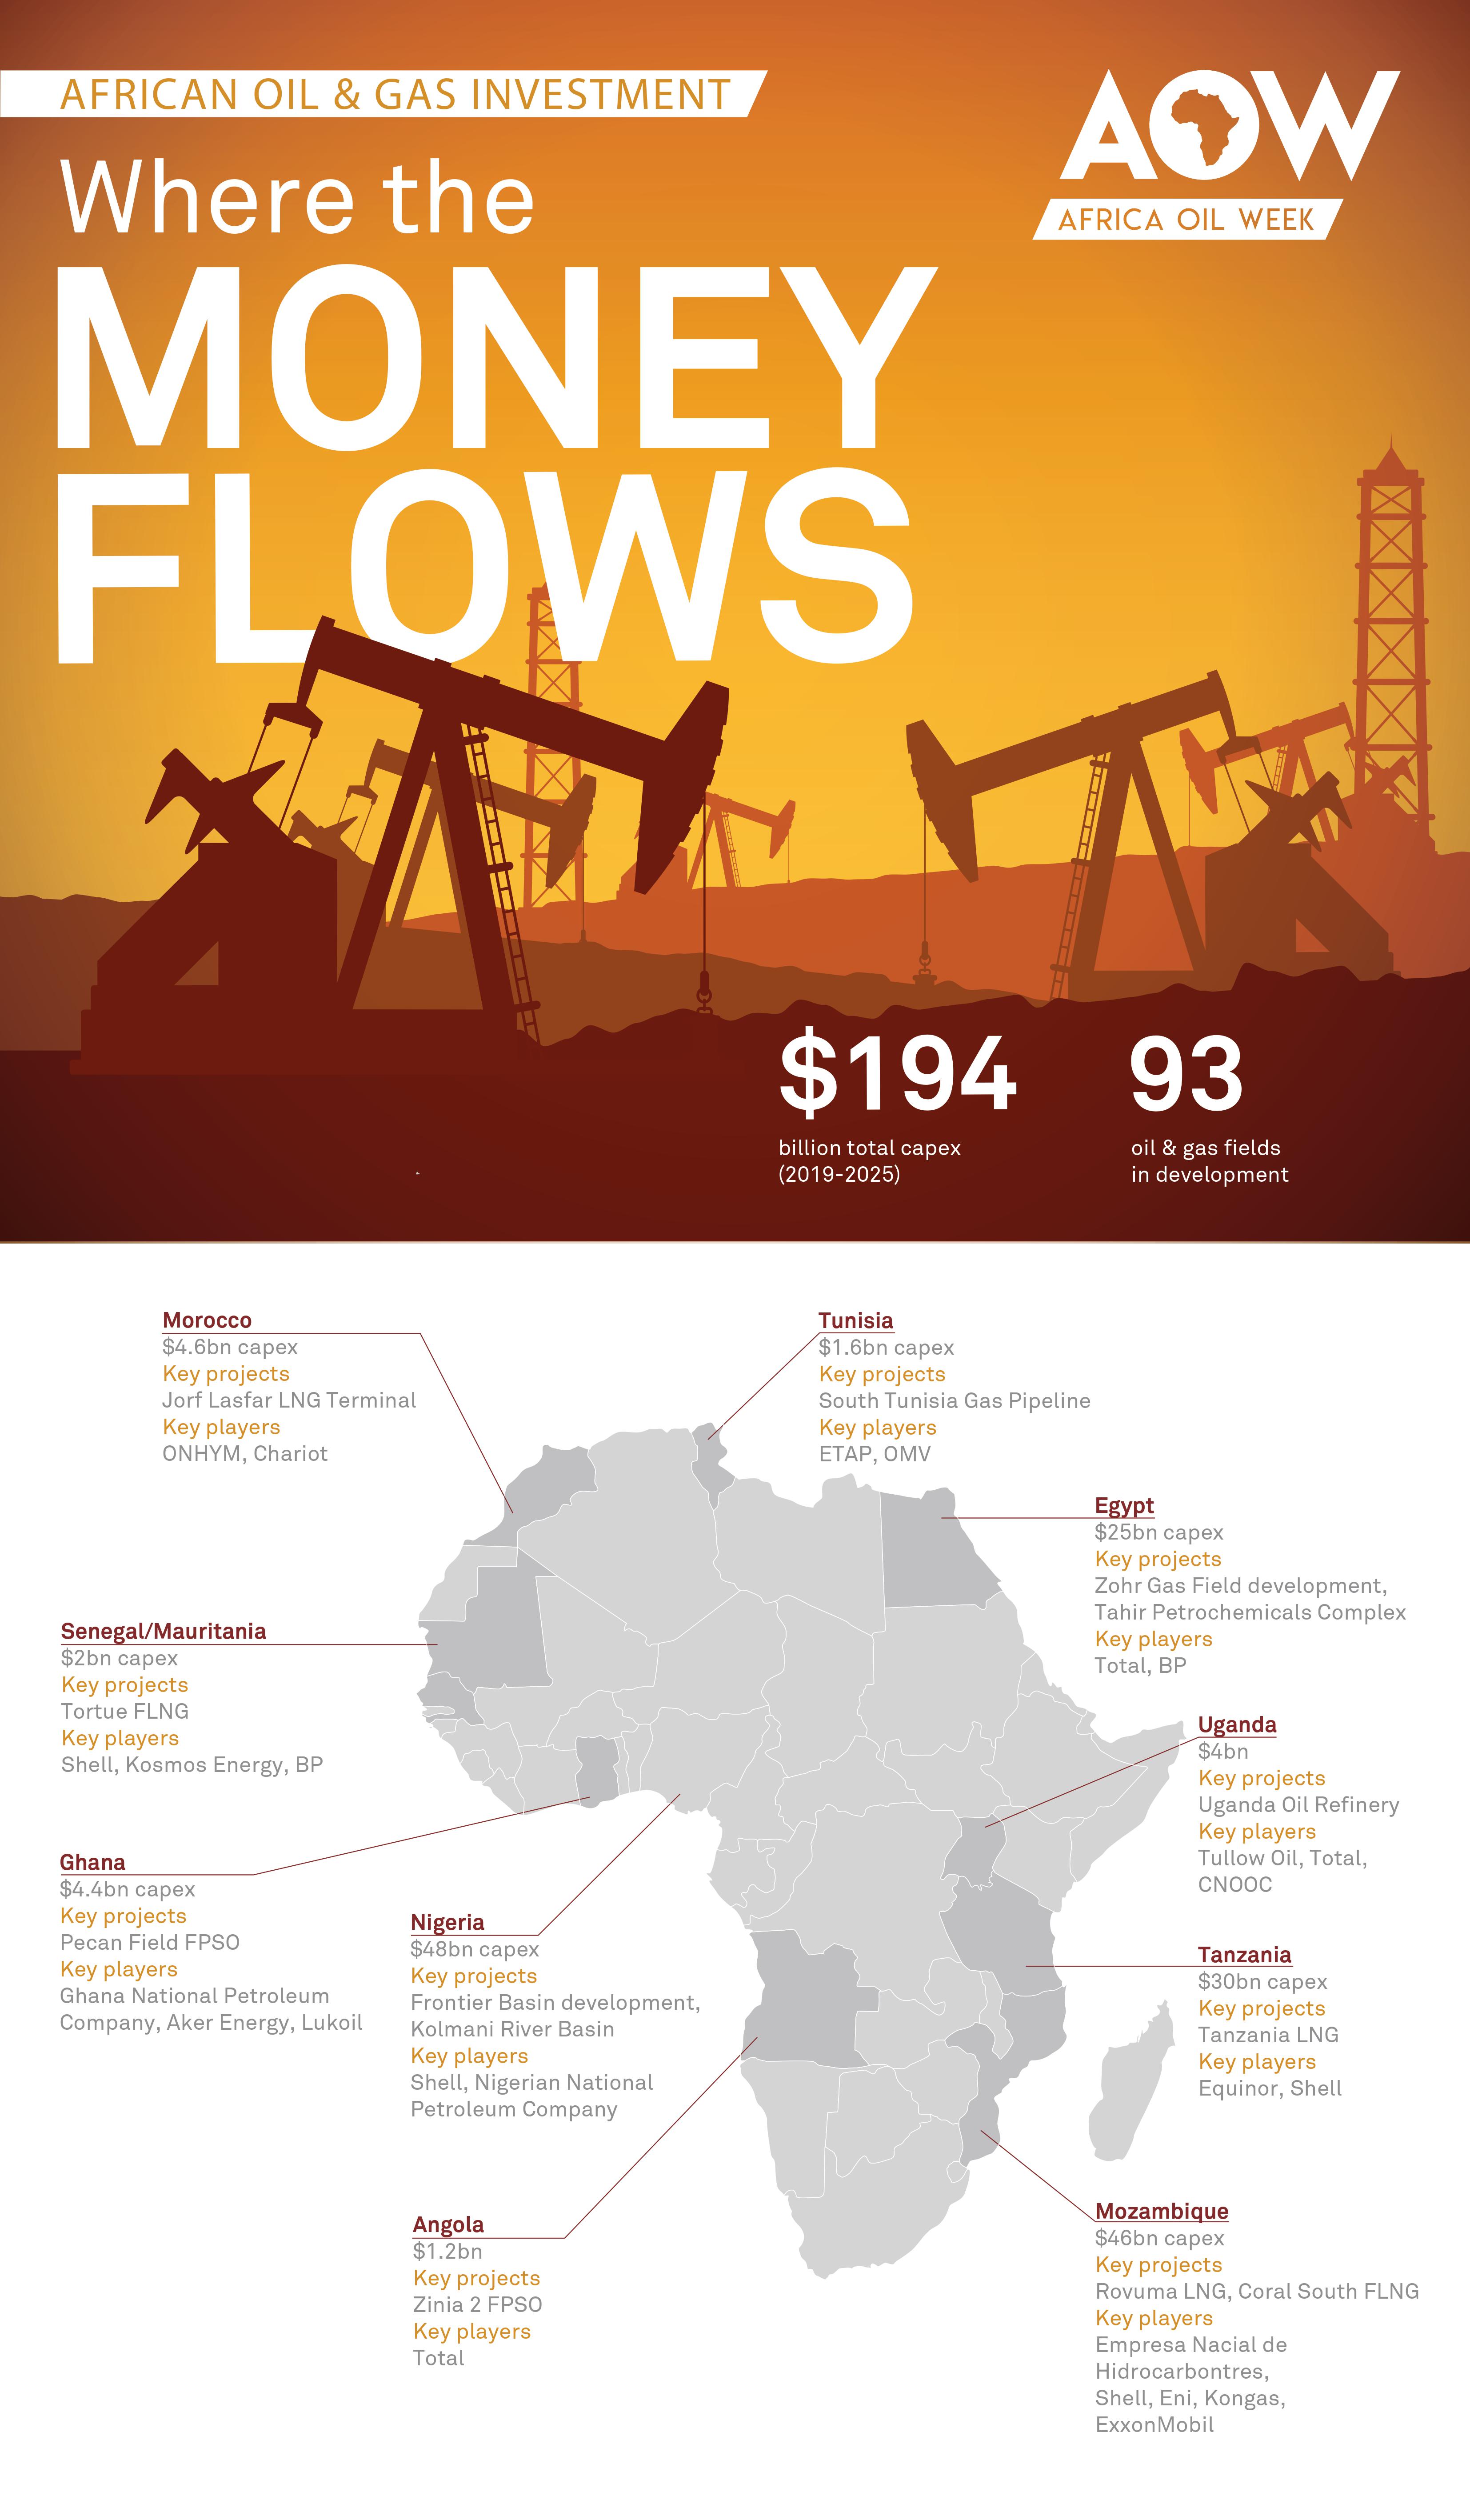 Where the money - African Oil & Gas investment